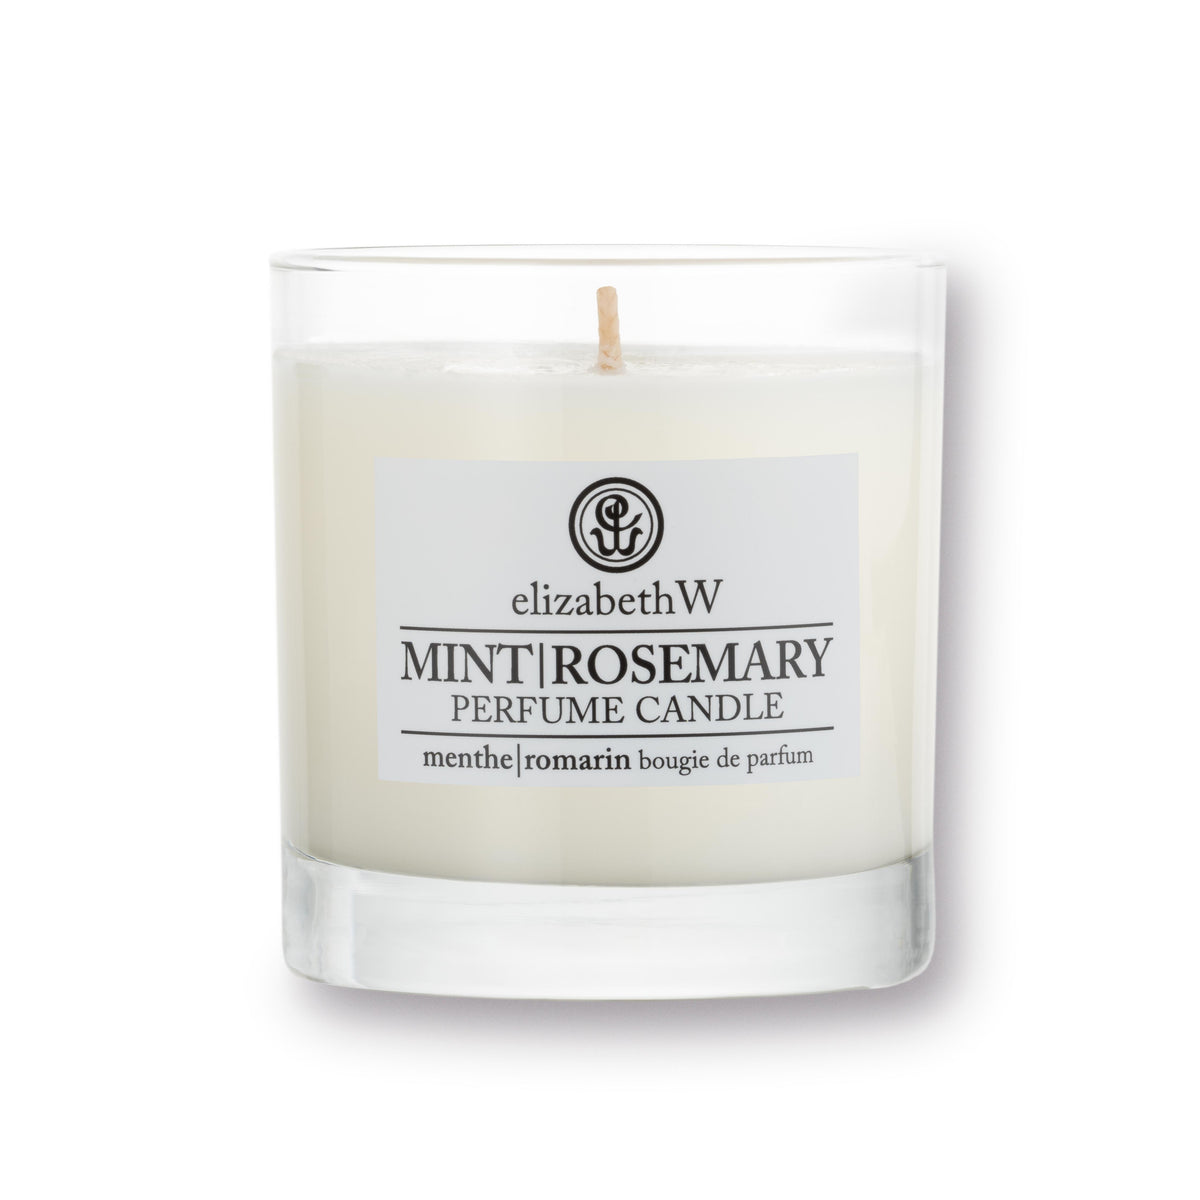 Mint Rosemary Candle